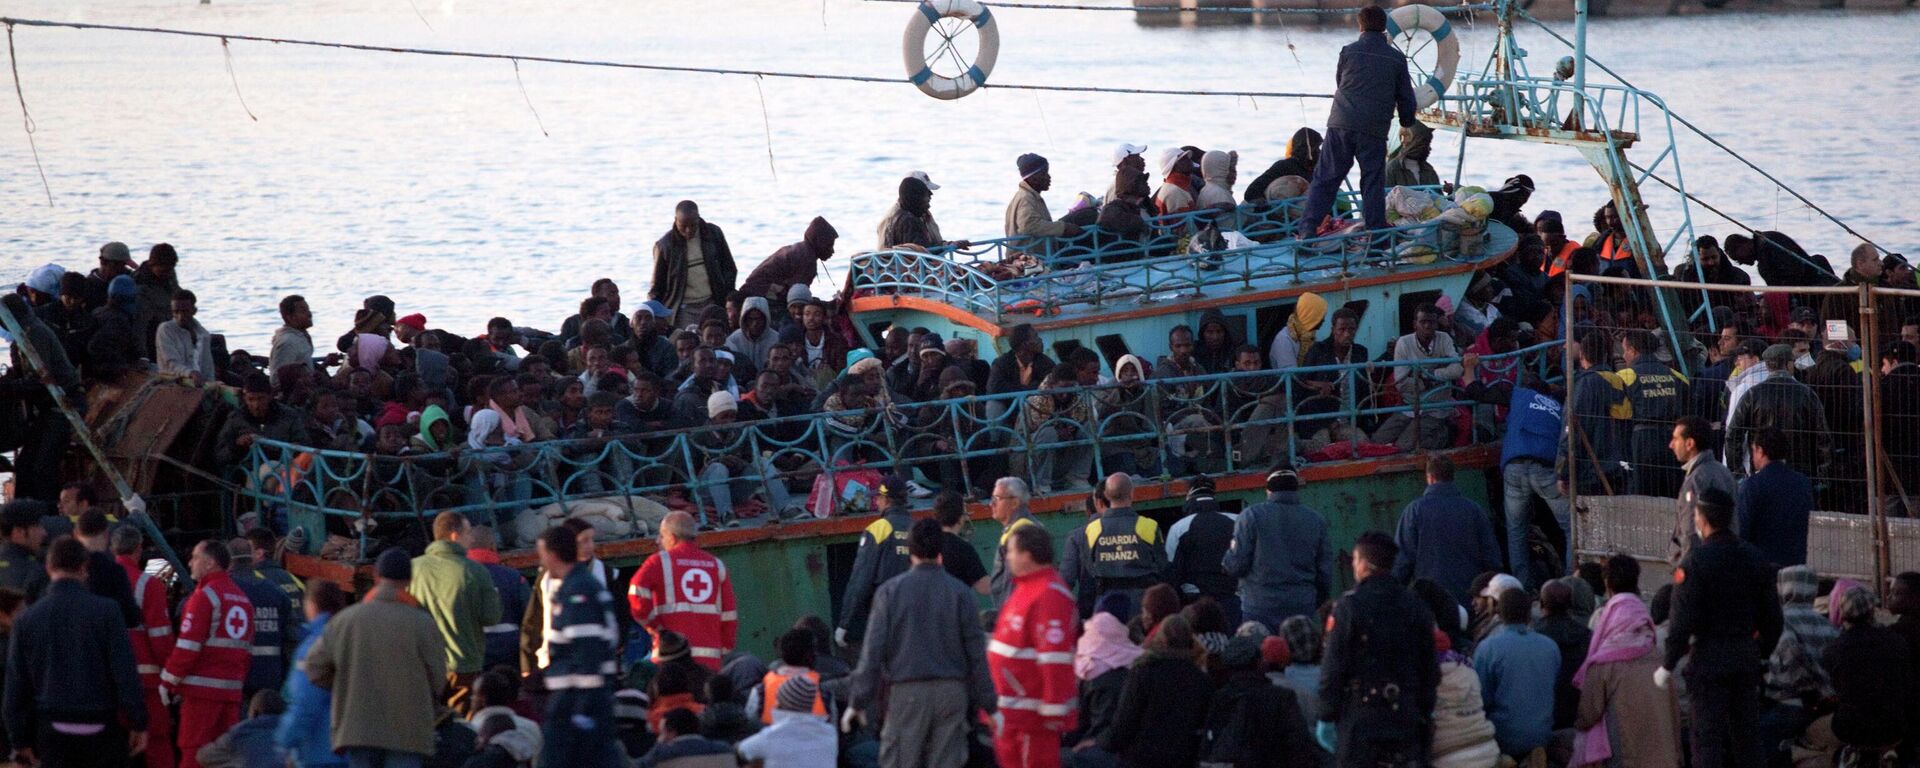 Immigrants disembark a boat at Lampedusa's harbor, Italy, Friday, April 8, 2011. After days of fierce sparring, Italy and France patched up their differences Friday over the fate of thousands of Tunisian migrants, avoiding a major rift over European Union border control rules. Top security officials from Italy and France sought a conciliatory tone as they struggled with the crush of more than 20,000 Tunisians who sailed on often rickety boats to Italy's southernmost point, the tiny Mediterranean island of Lampedusa. (AP Photo/Giorgos Moutafis)  GREECE OUT - Sputnik International, 1920, 28.03.2023